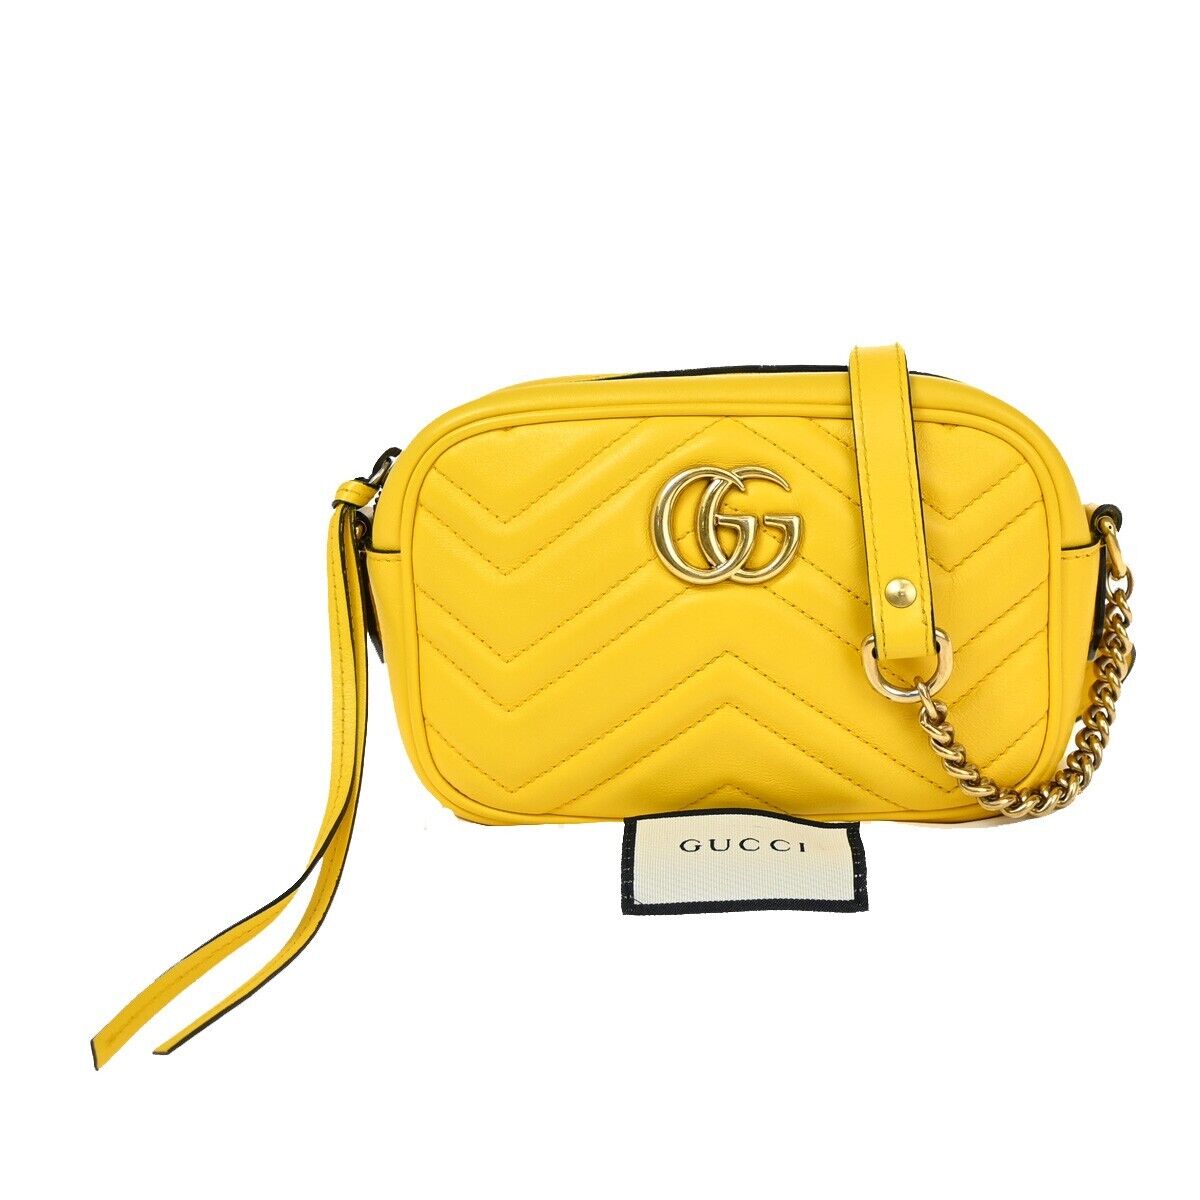 Gucci Marmont Yellow Leather Shoulder Bag ()